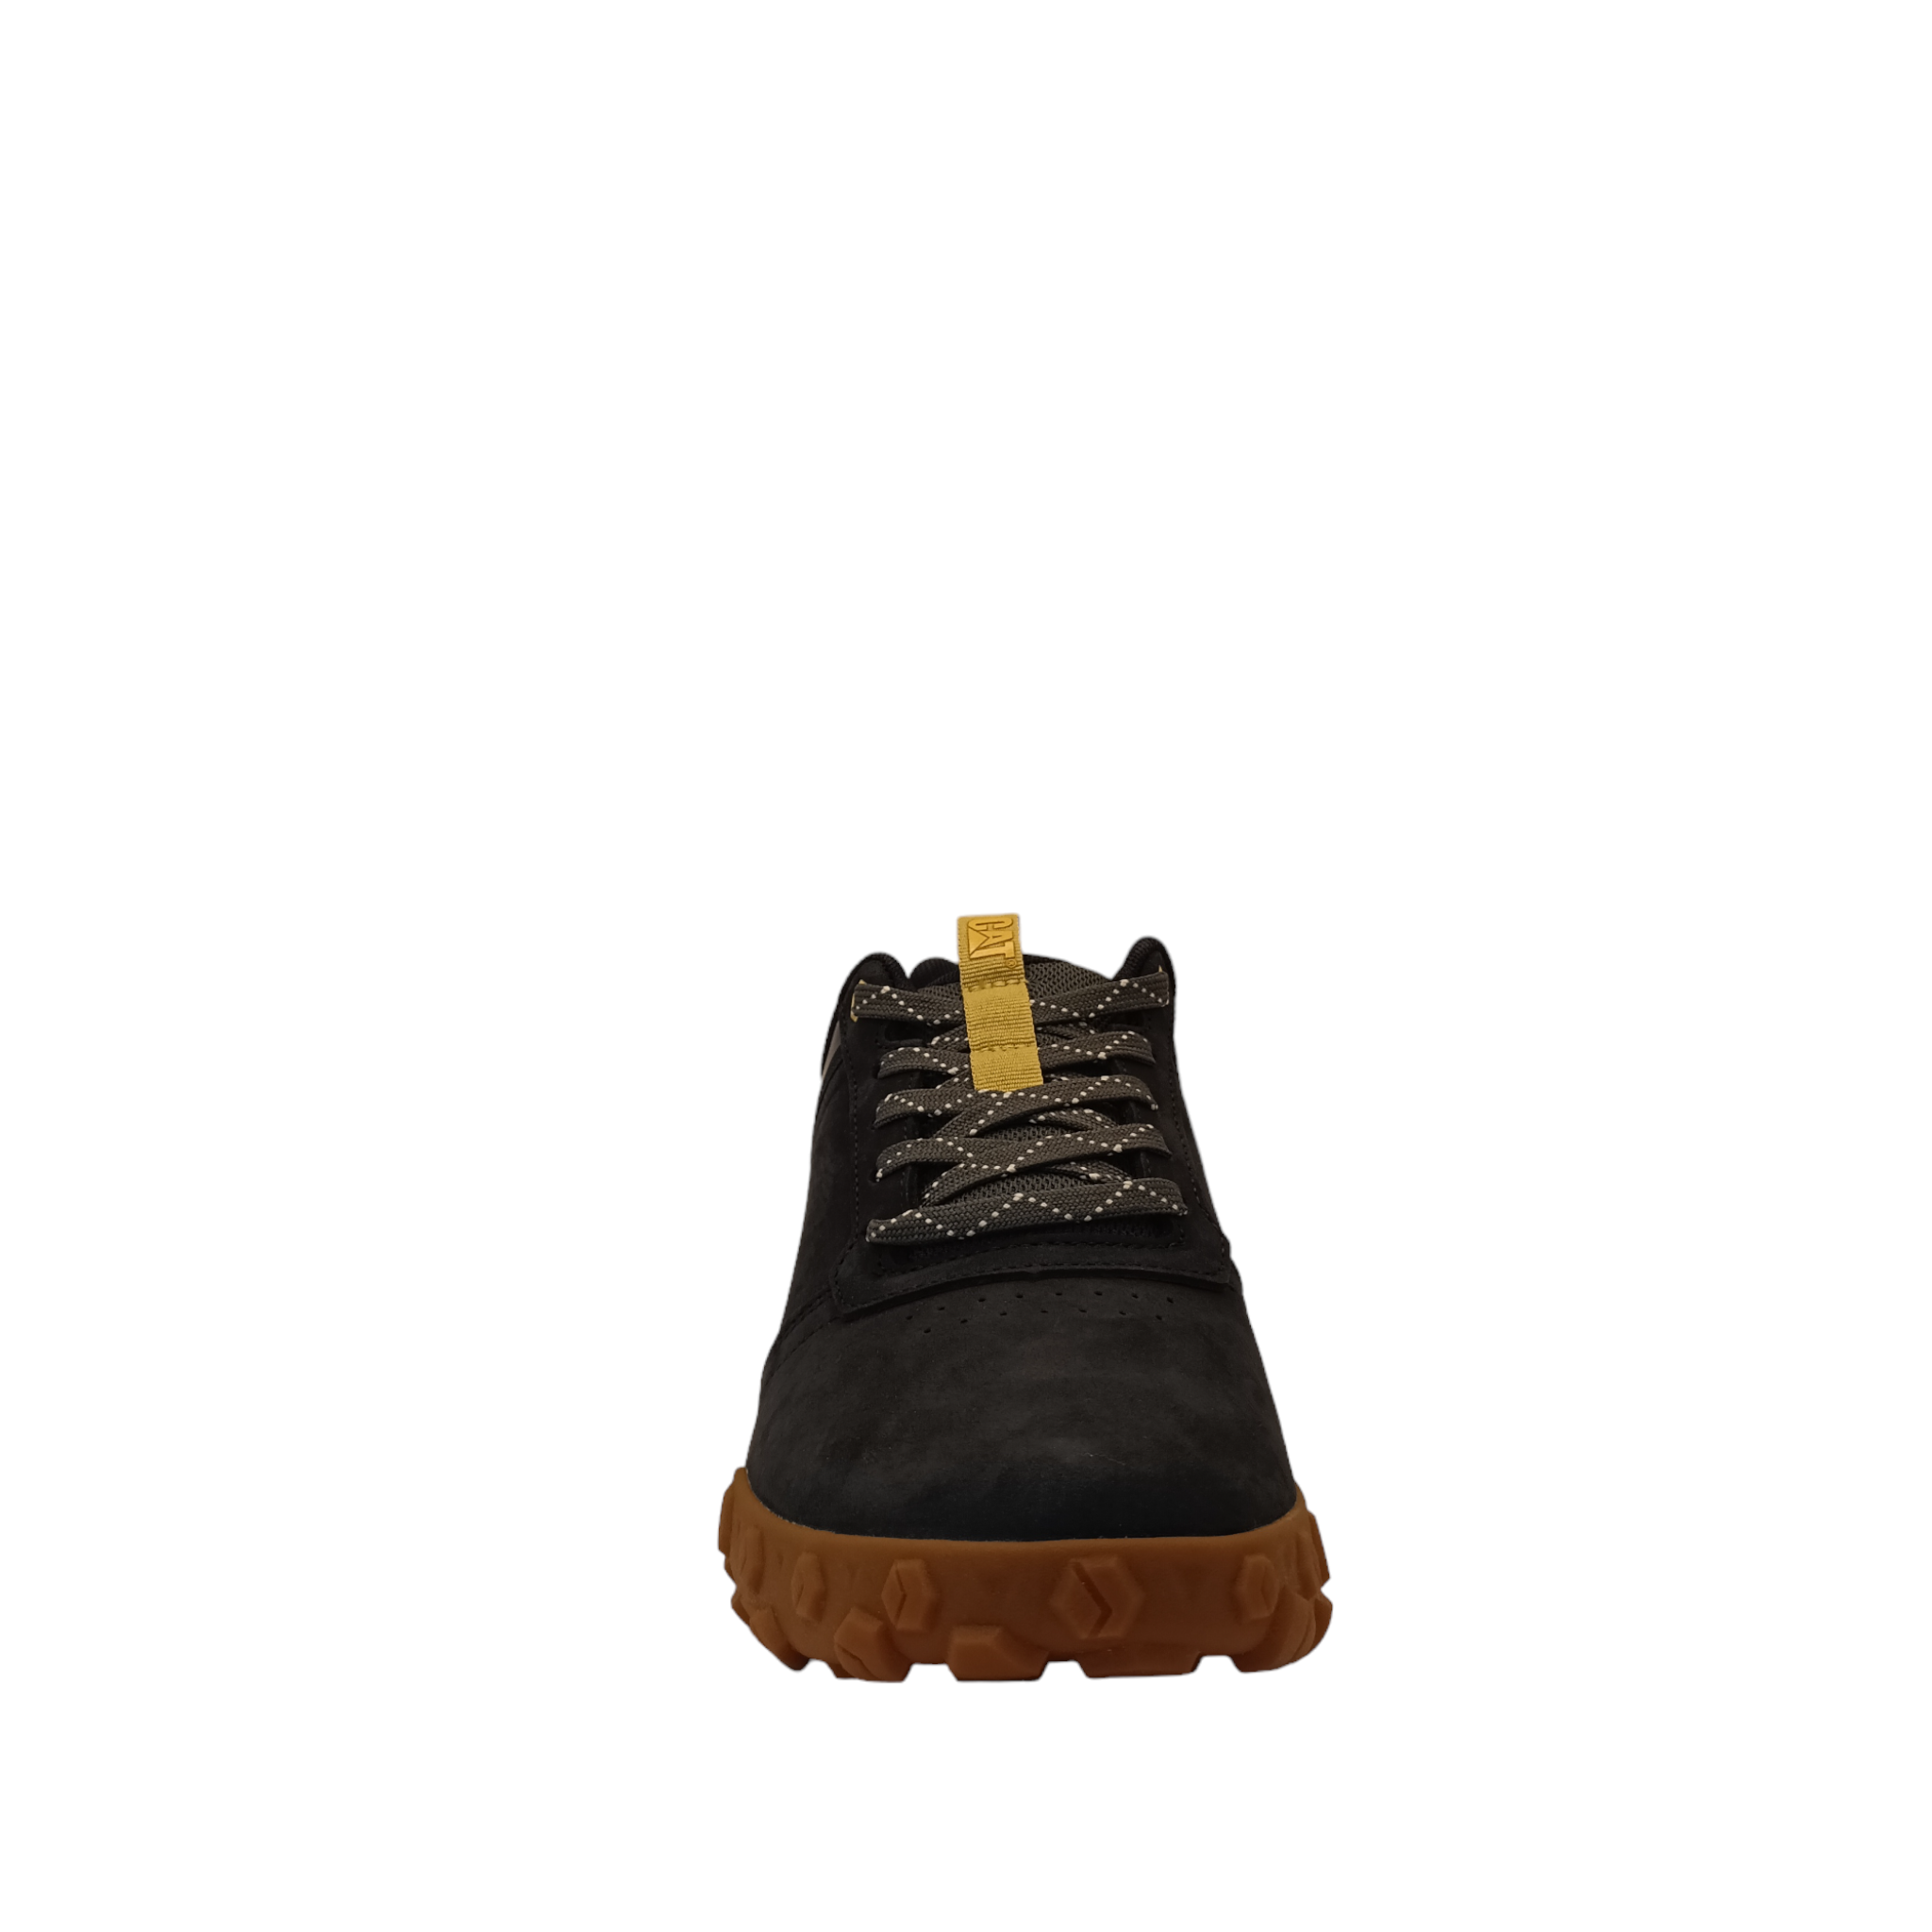 Shop Hex Cush Lo Caterpillar - with shoe&me - from Caterpillar - Shoes - Mens, Sneaker, Winter - [collection]